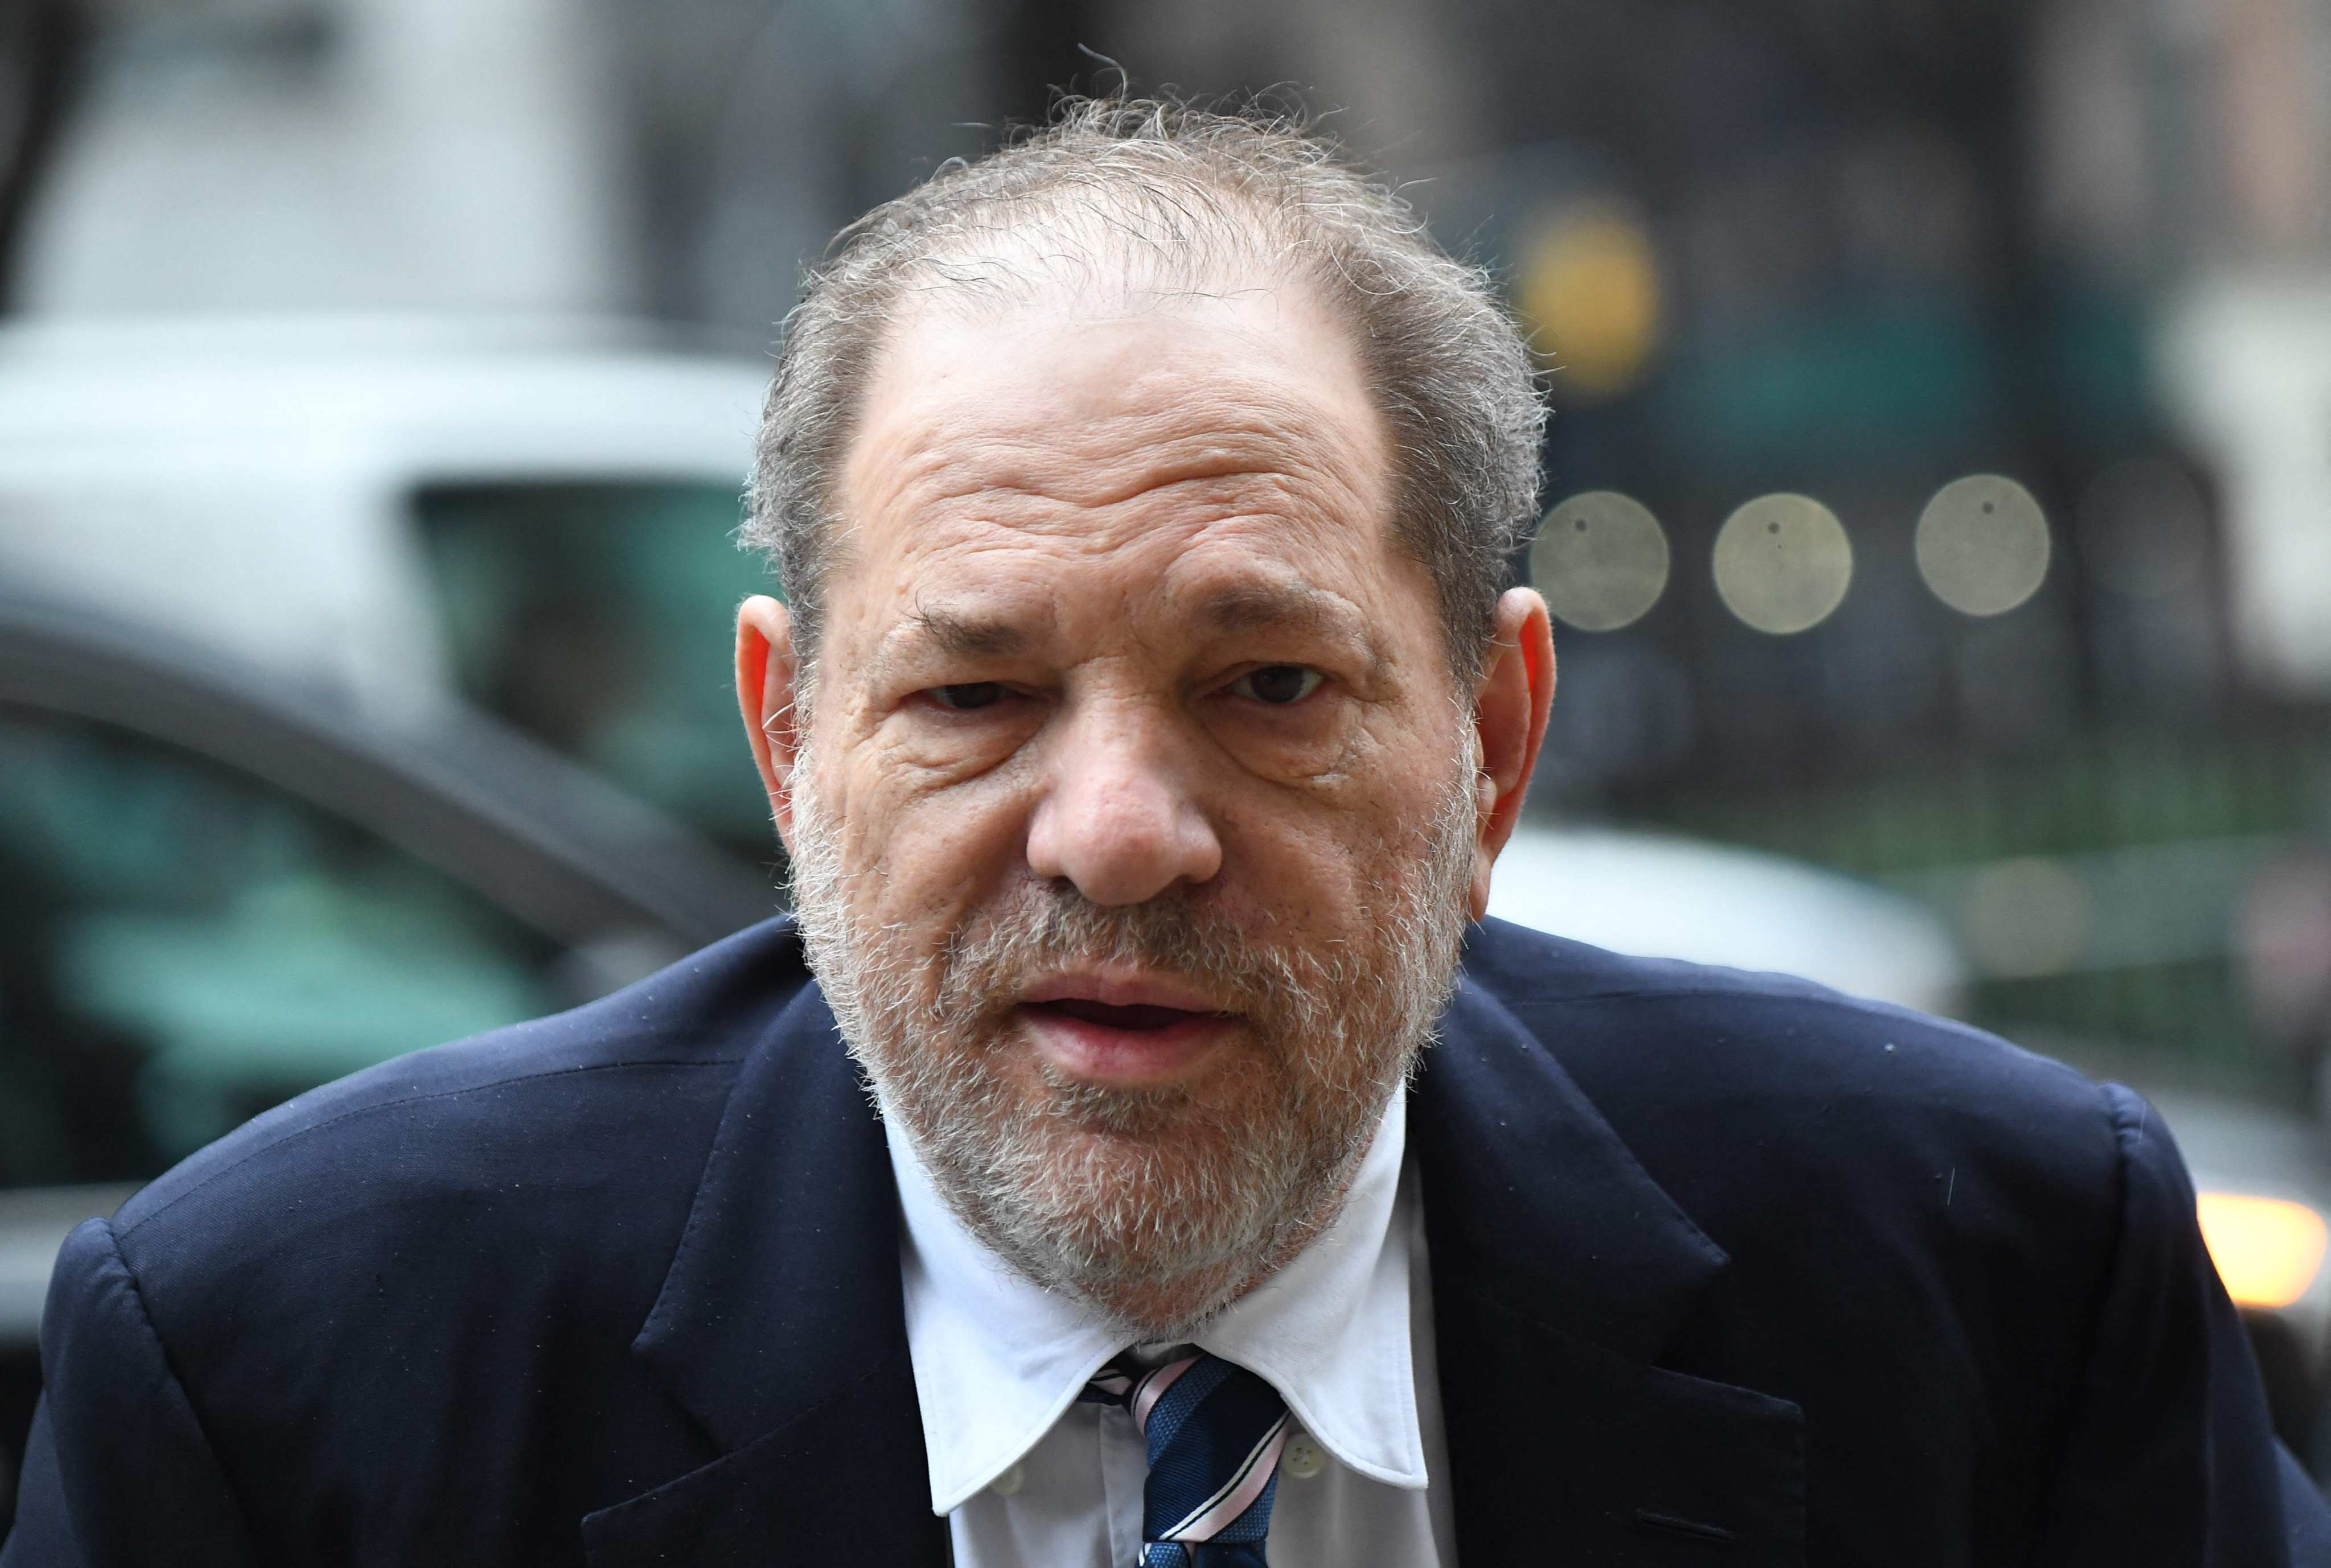 Harvey Weinstein arrives at the Manhattan Criminal Court in New York in February 2020. Photo: AFP